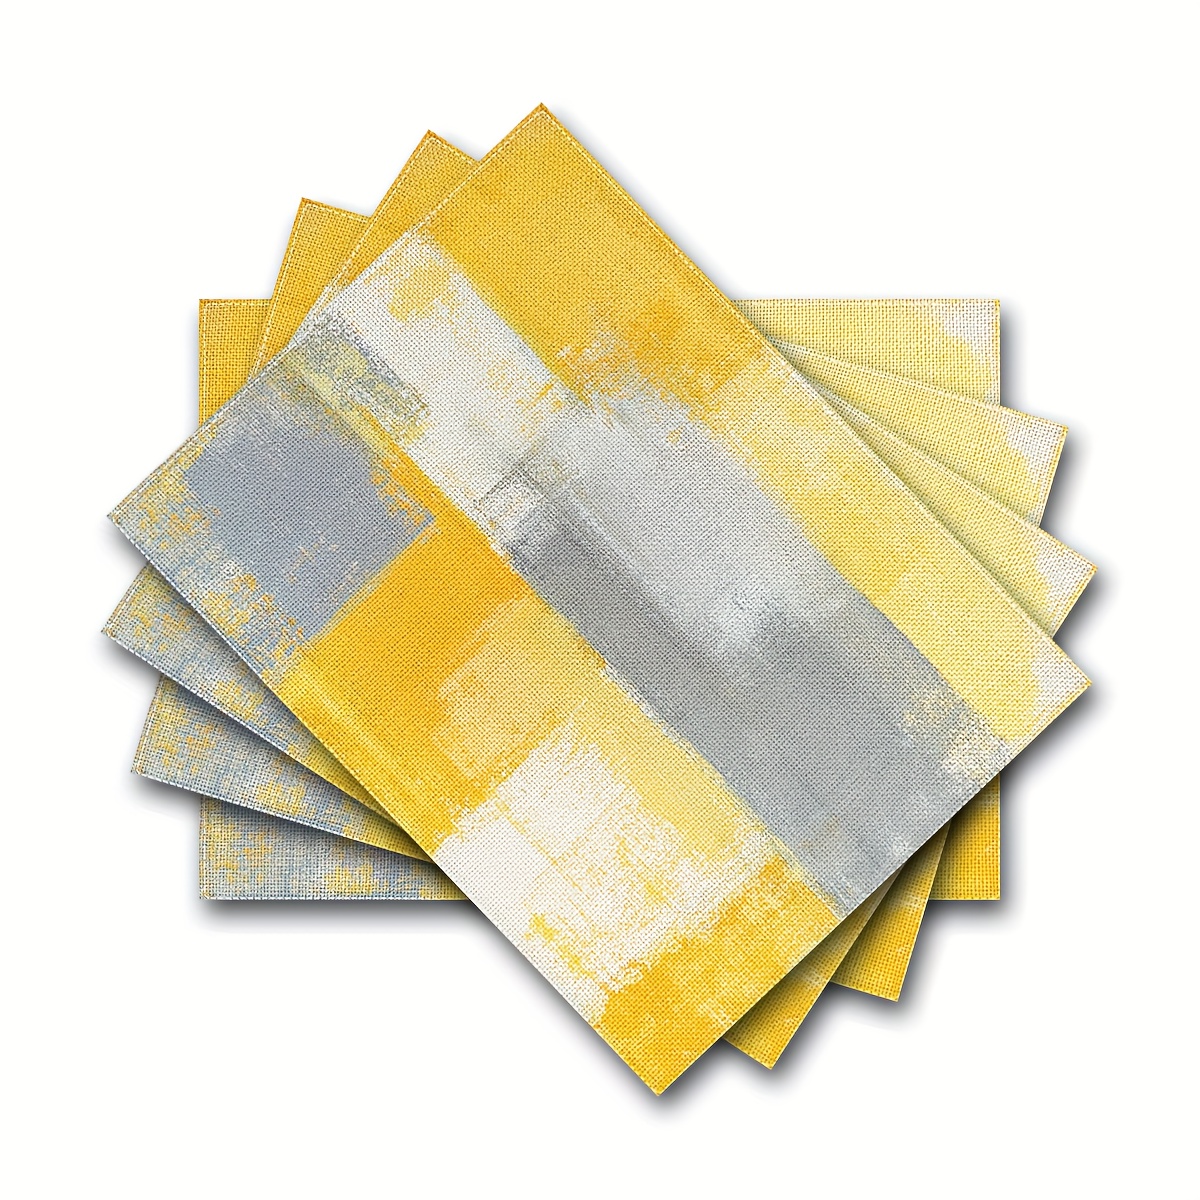 

4pcs, Linen Placemats Set, Modern Grey White And Yellow Art Painting Table Mats, Abstract Art Table Decor Perfect For Home, Party, Kitchen Dining Outdoor Decor